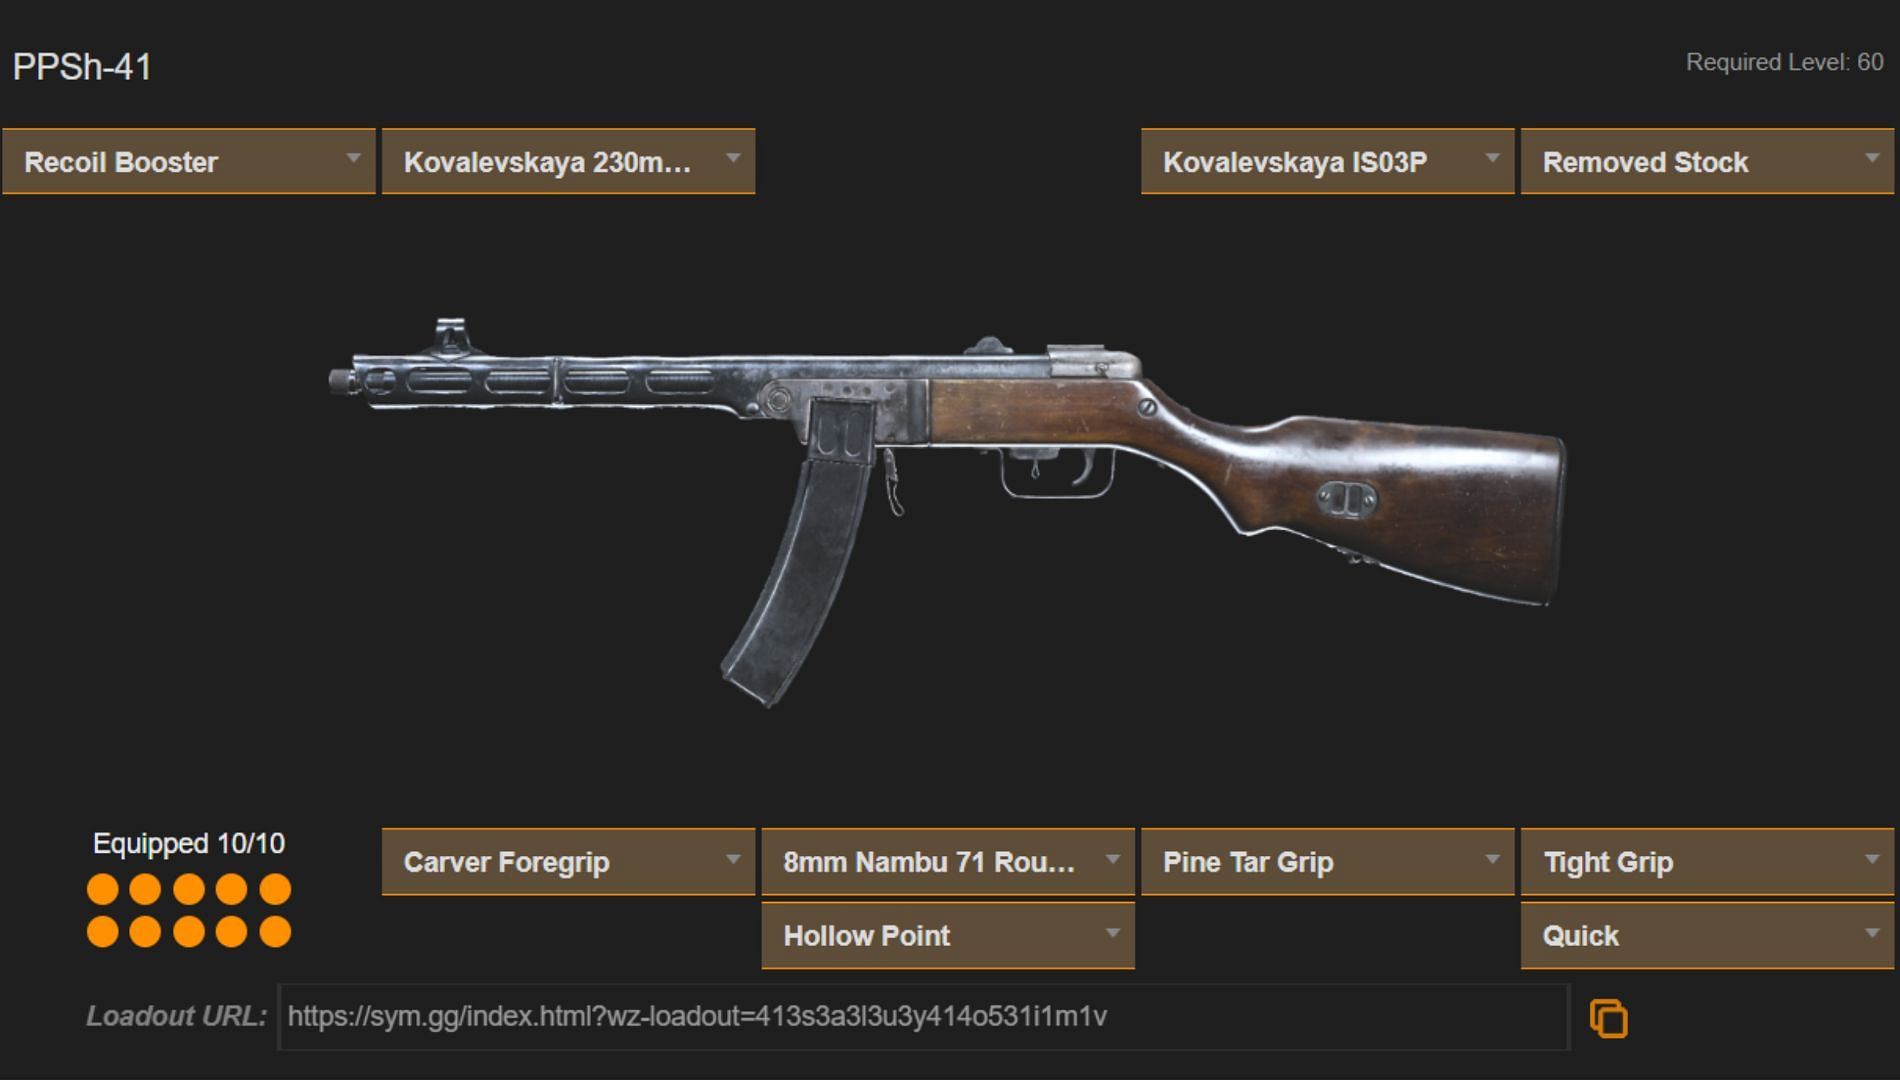 Call of Duty: Warzone VG PPSh-41 loadout (Image via sym.gg)